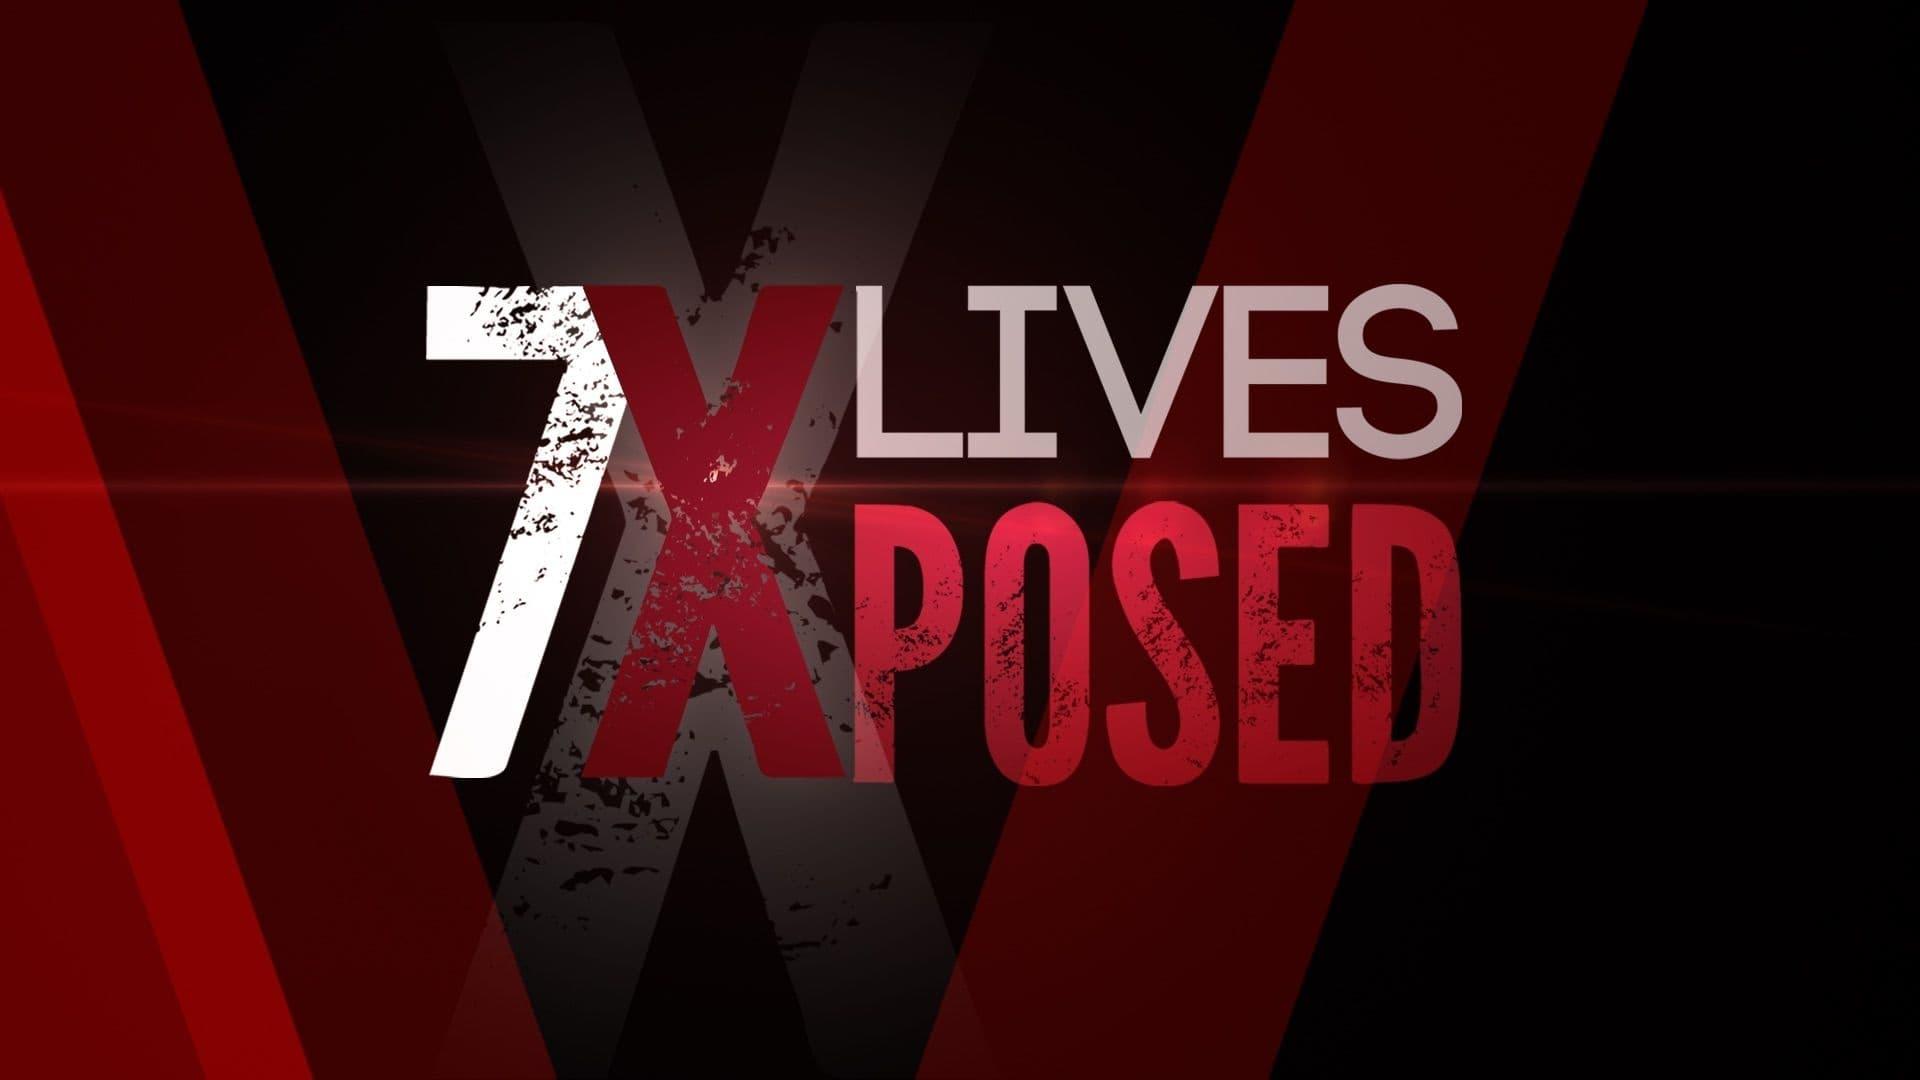 7 Lives Exposed backdrop